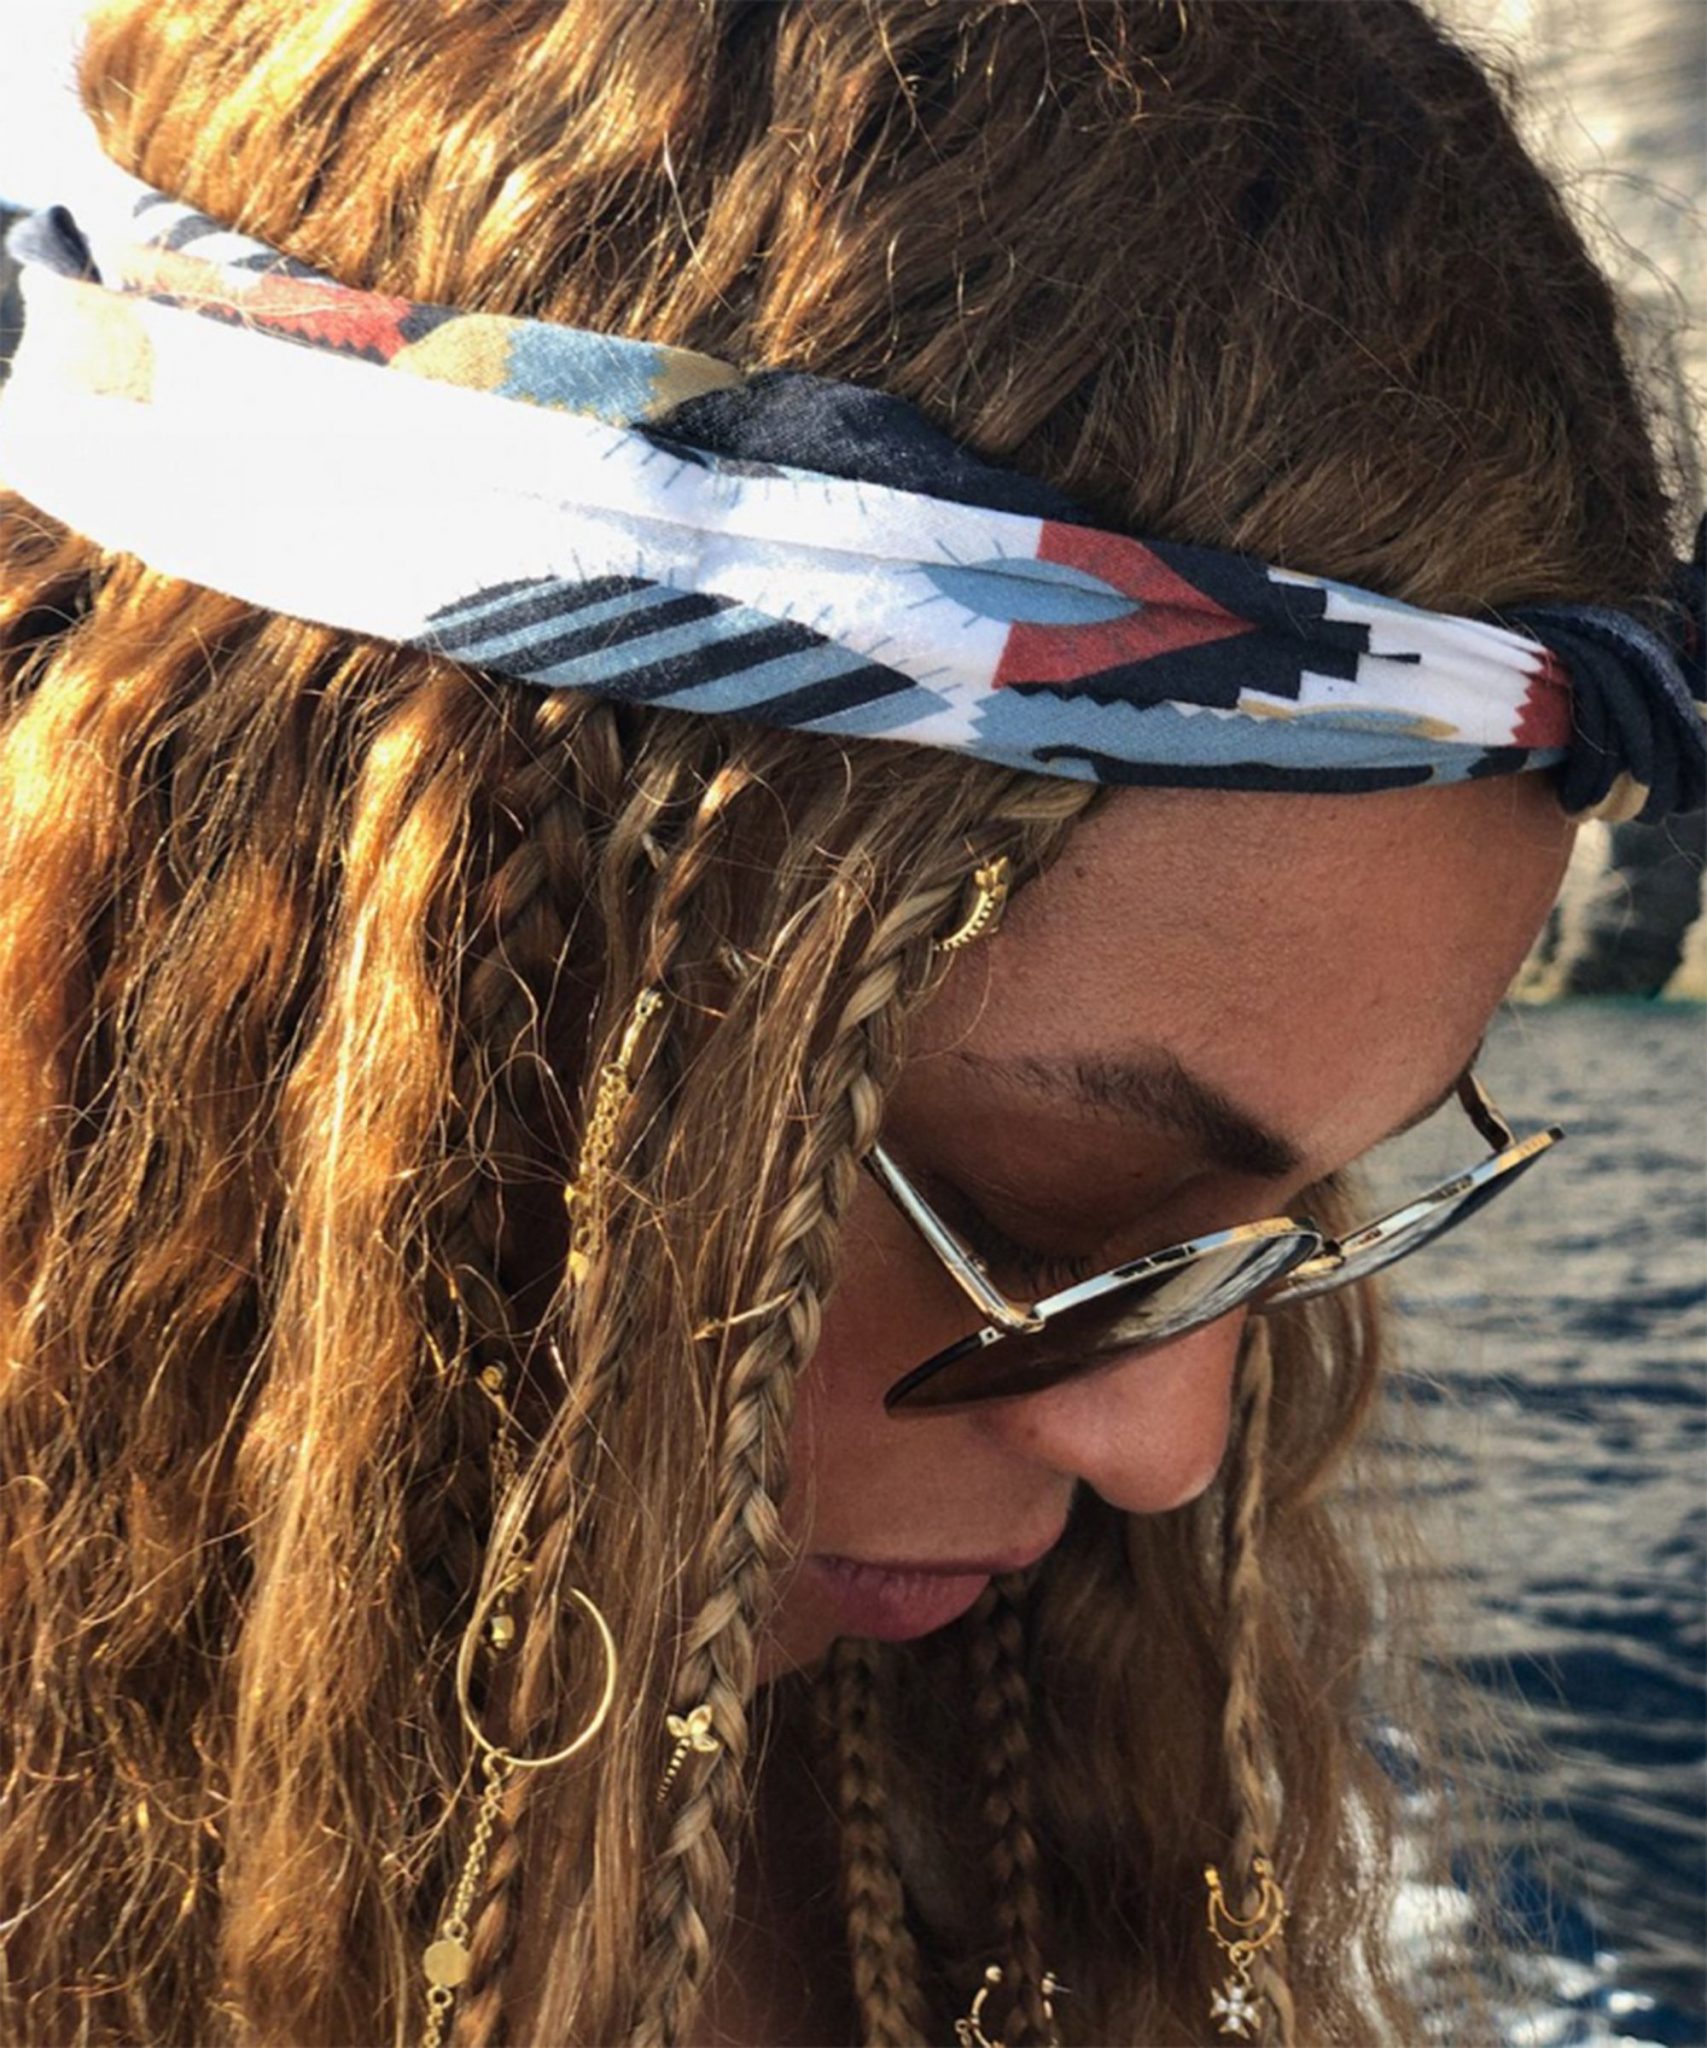 beyoncé just showed us how to do vacation hair right